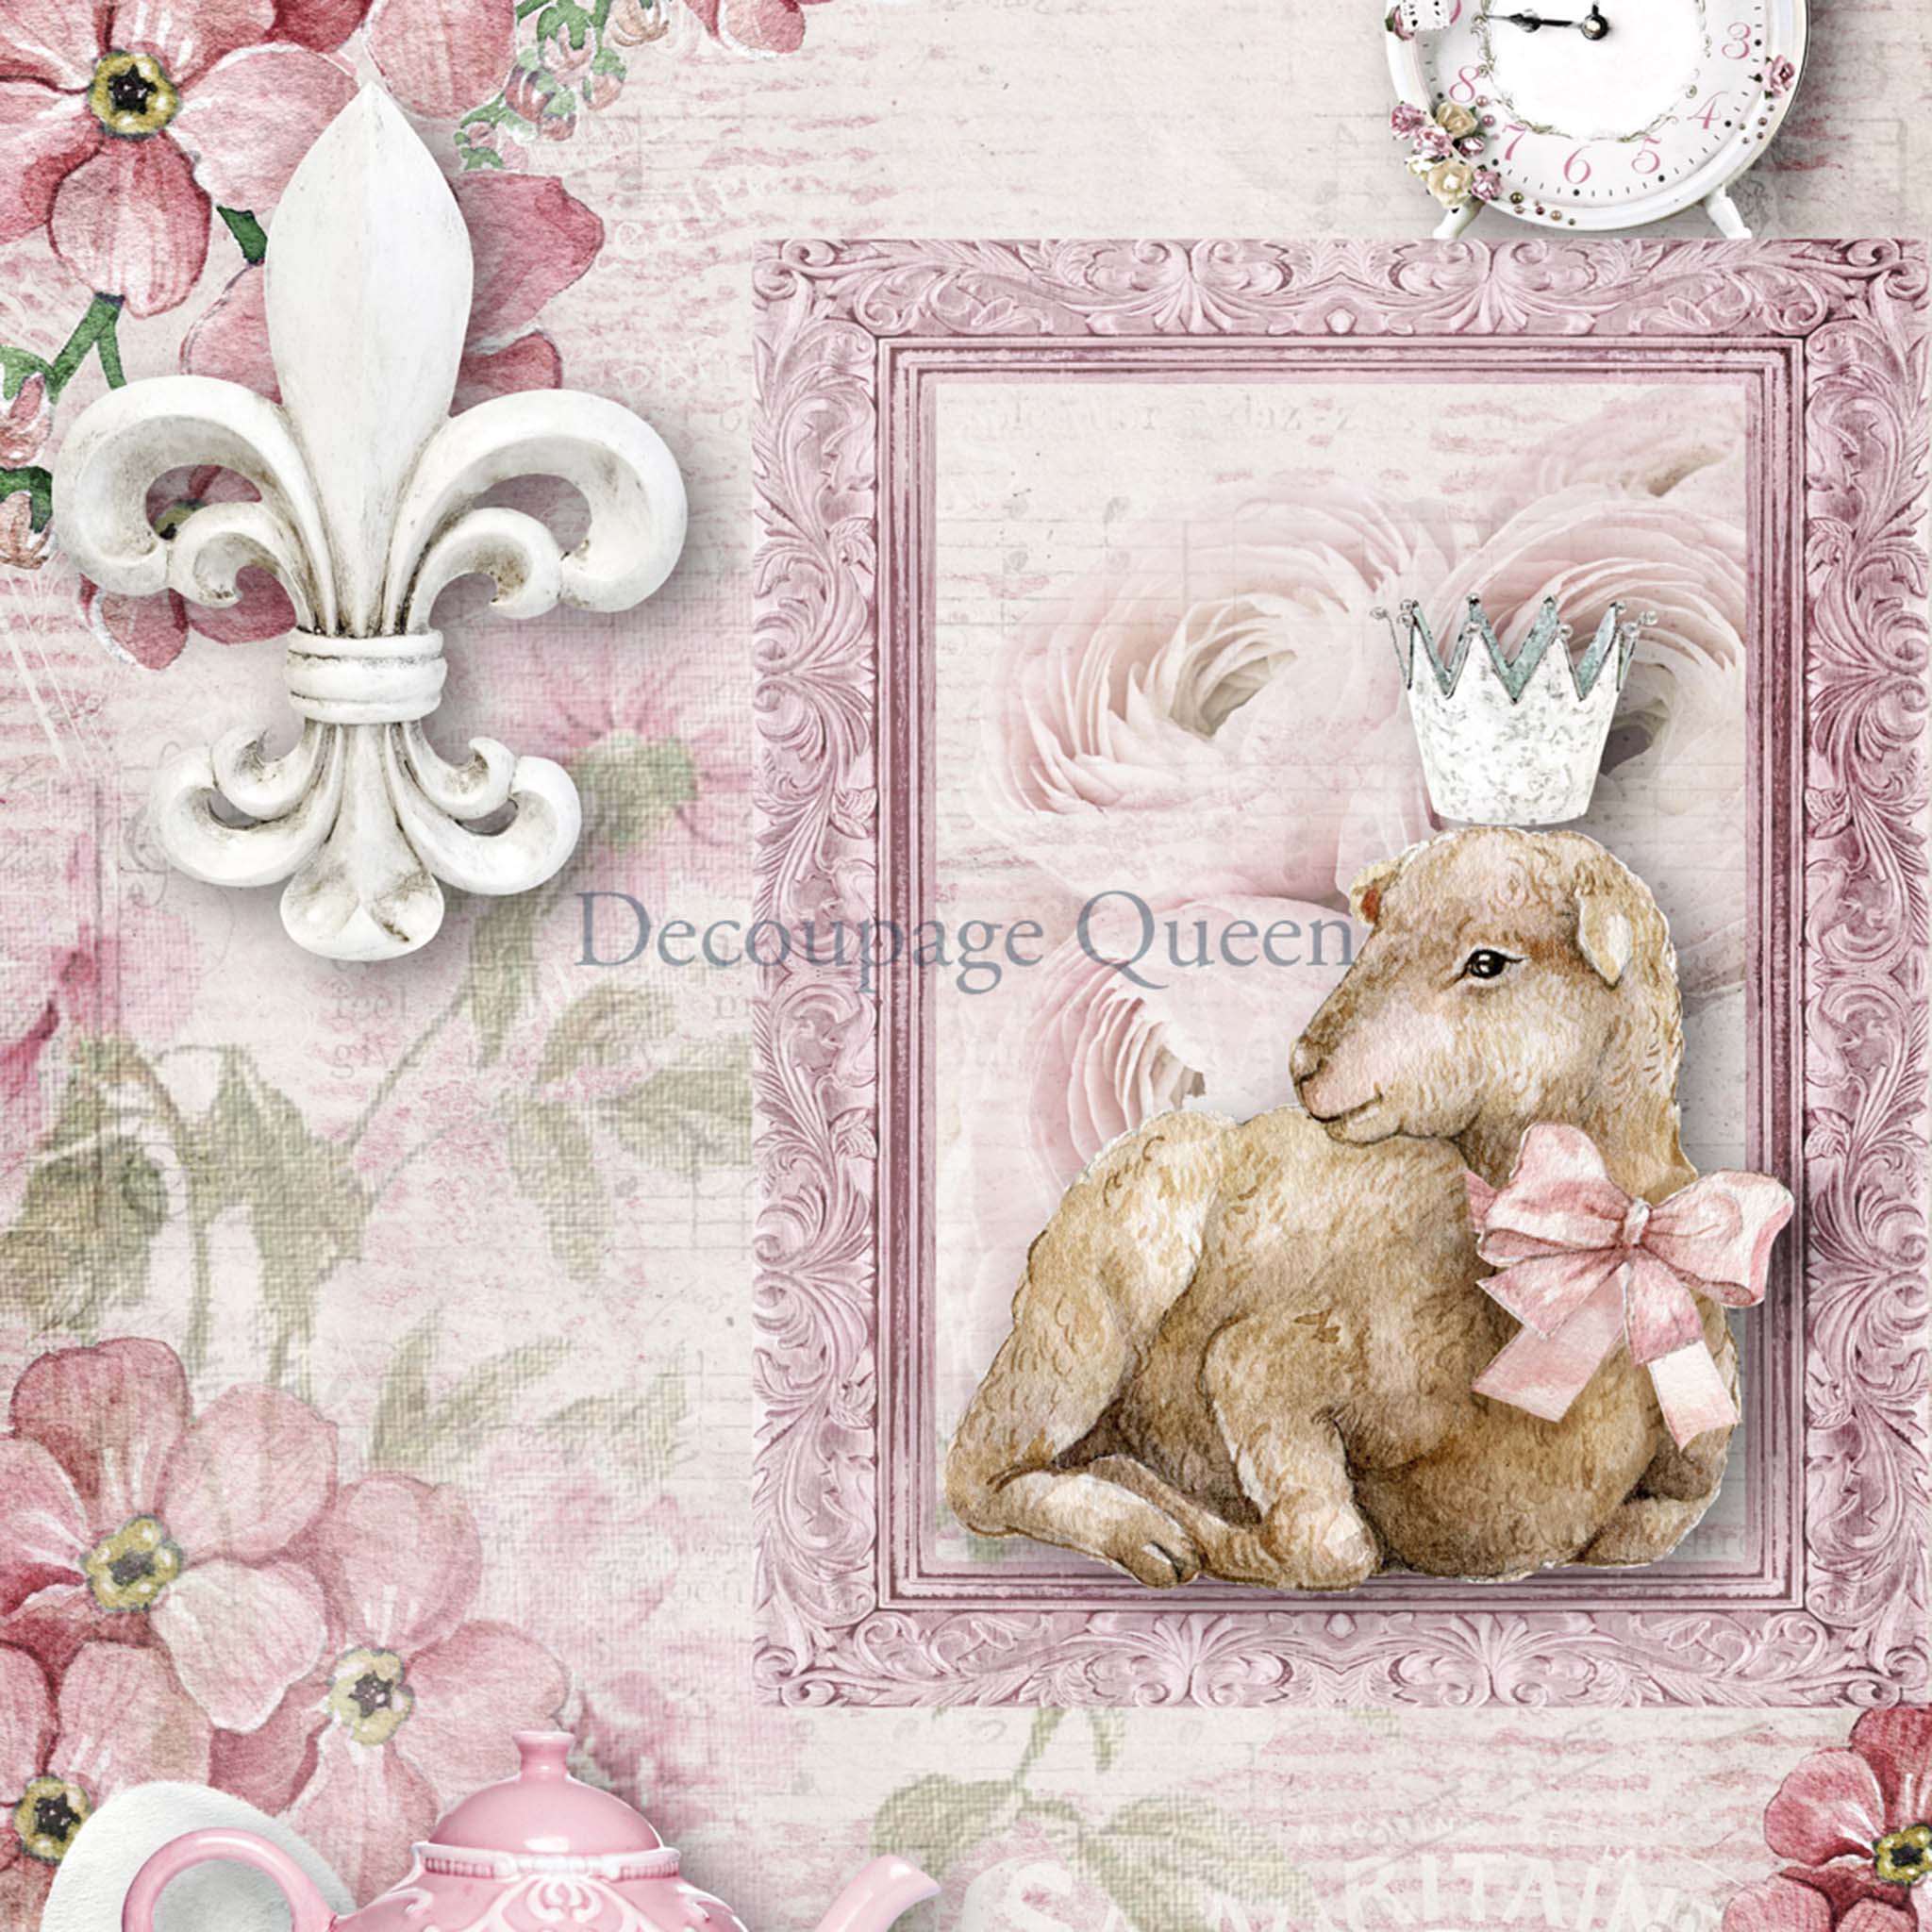 Close-up of an A4 rice paper design that features a pale pink background and adorable lamb with a crown and features fleur de lis, a clock, and a tea set with pink flowers.